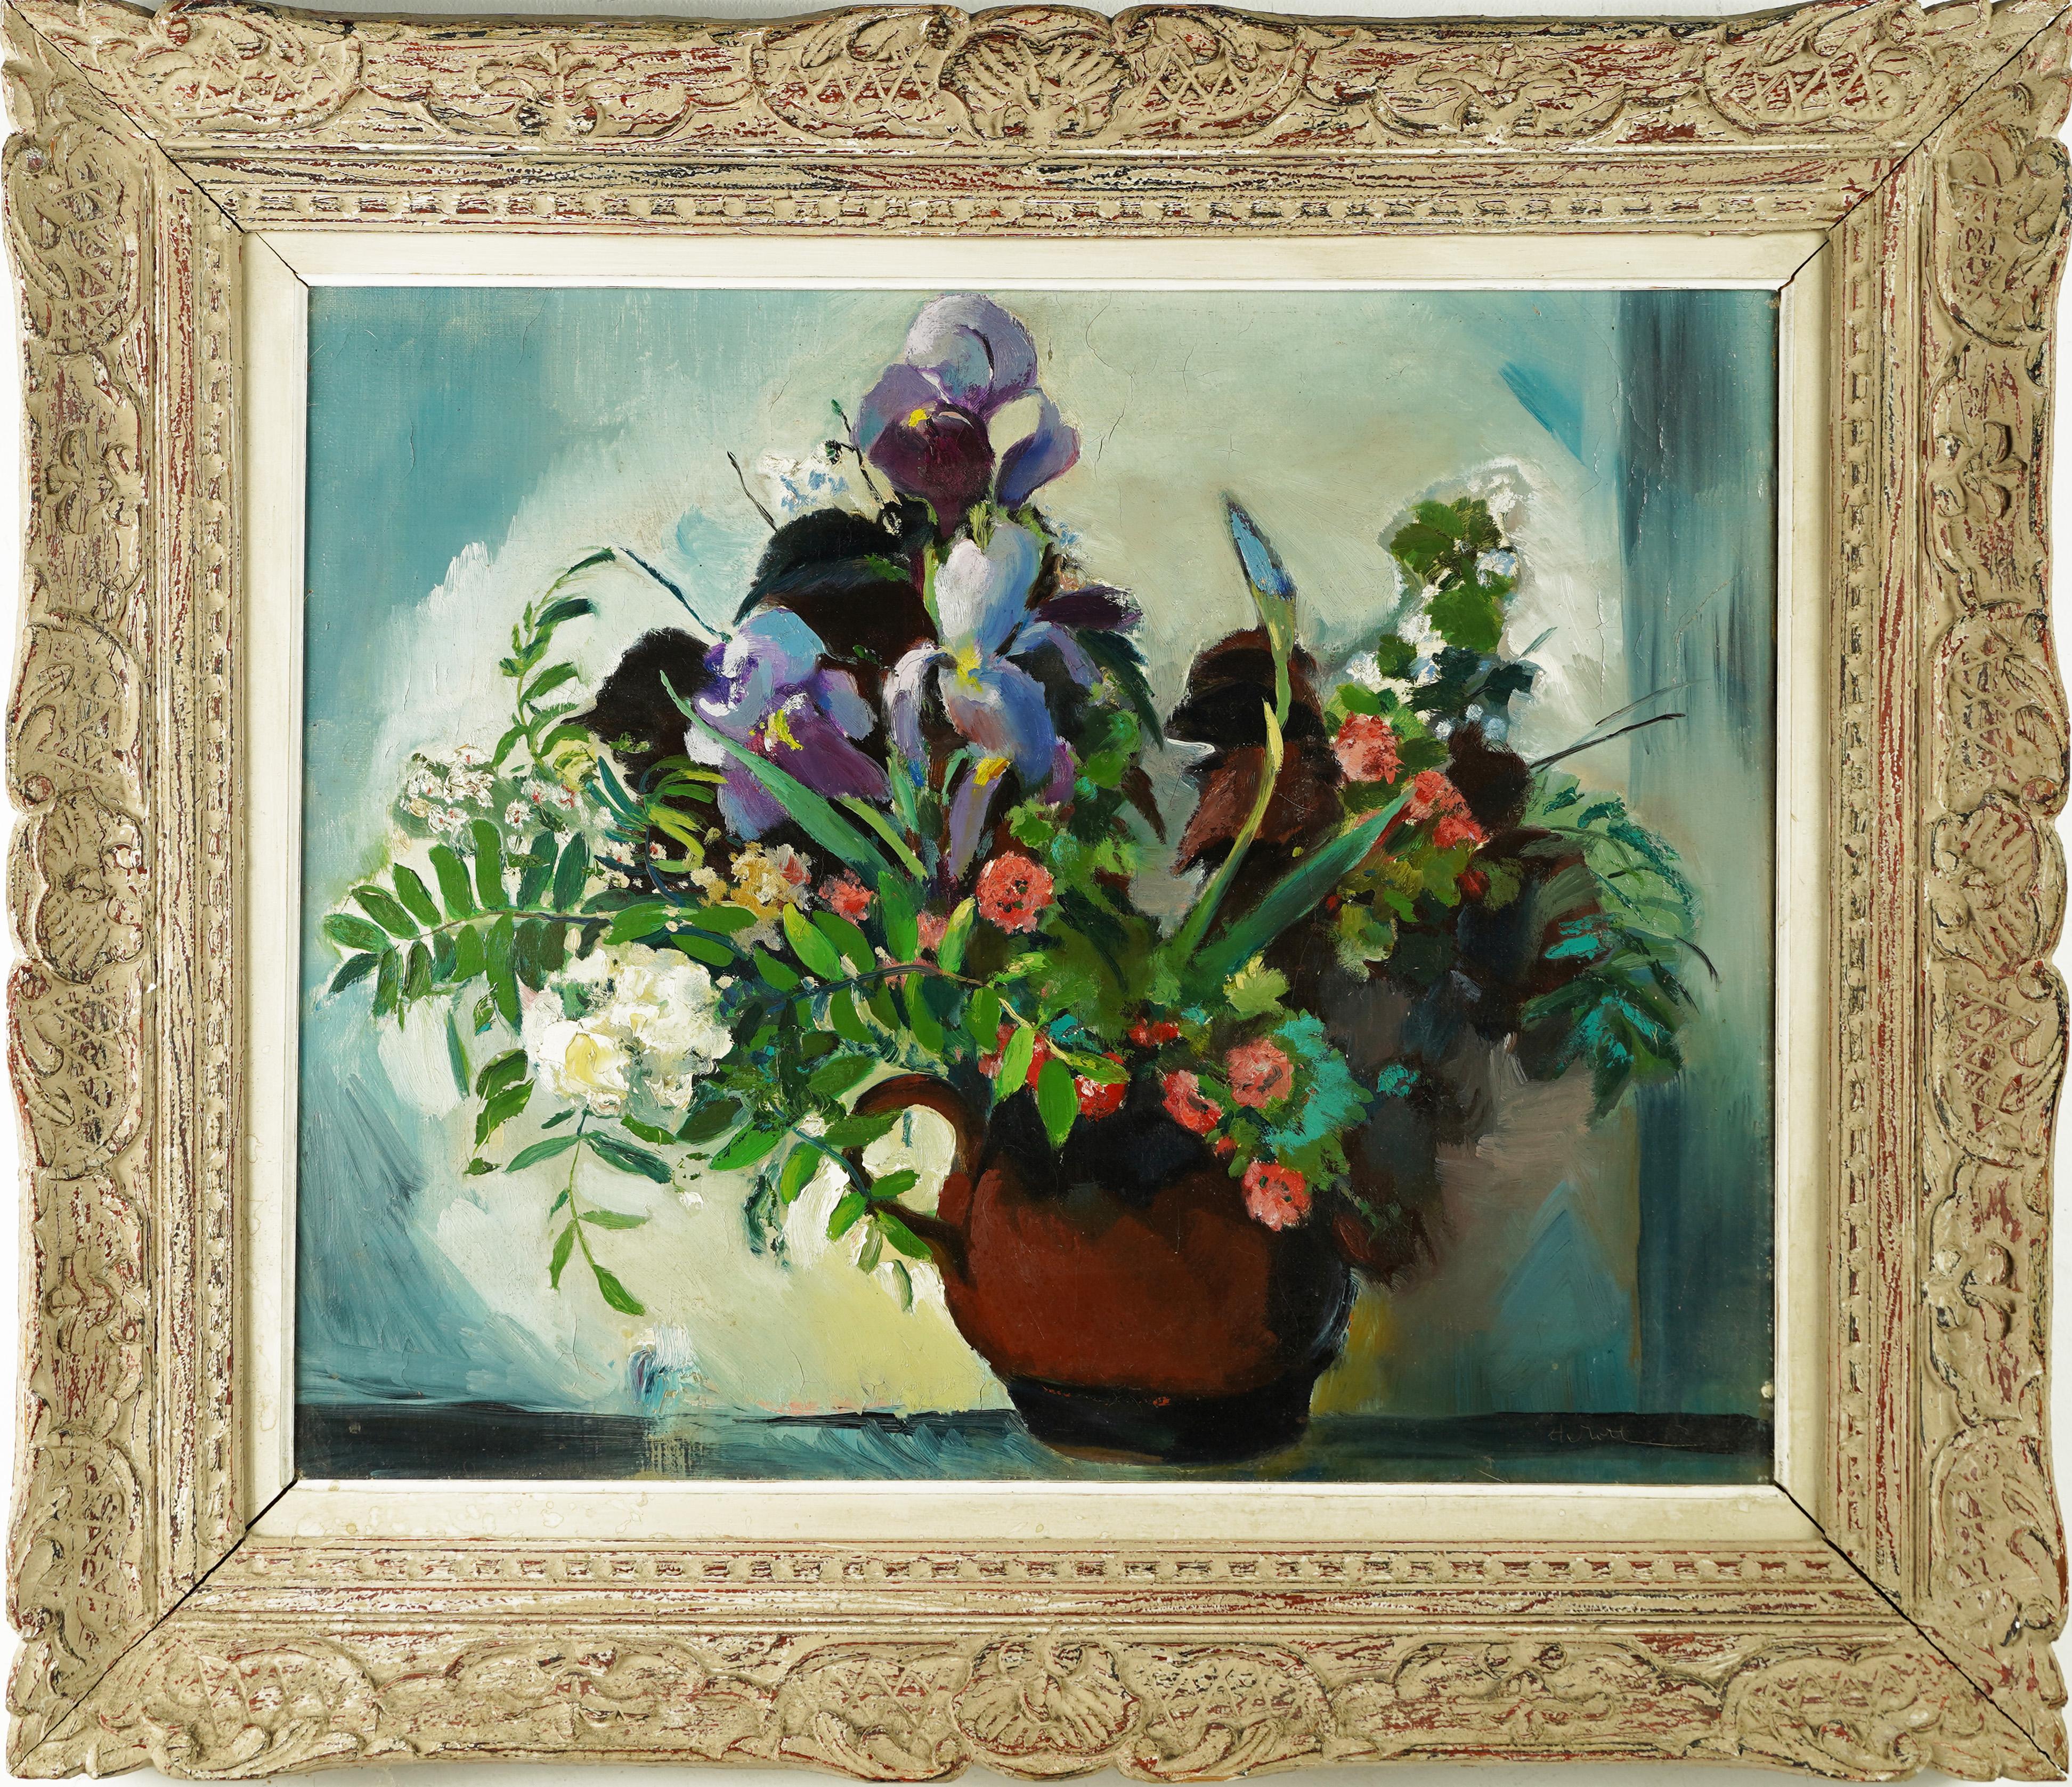 Antique American impressionist flower still life signed oil painting.  Oil on canvas.  Signed.  Framed.  Image size, 25.5L x 21.5H.